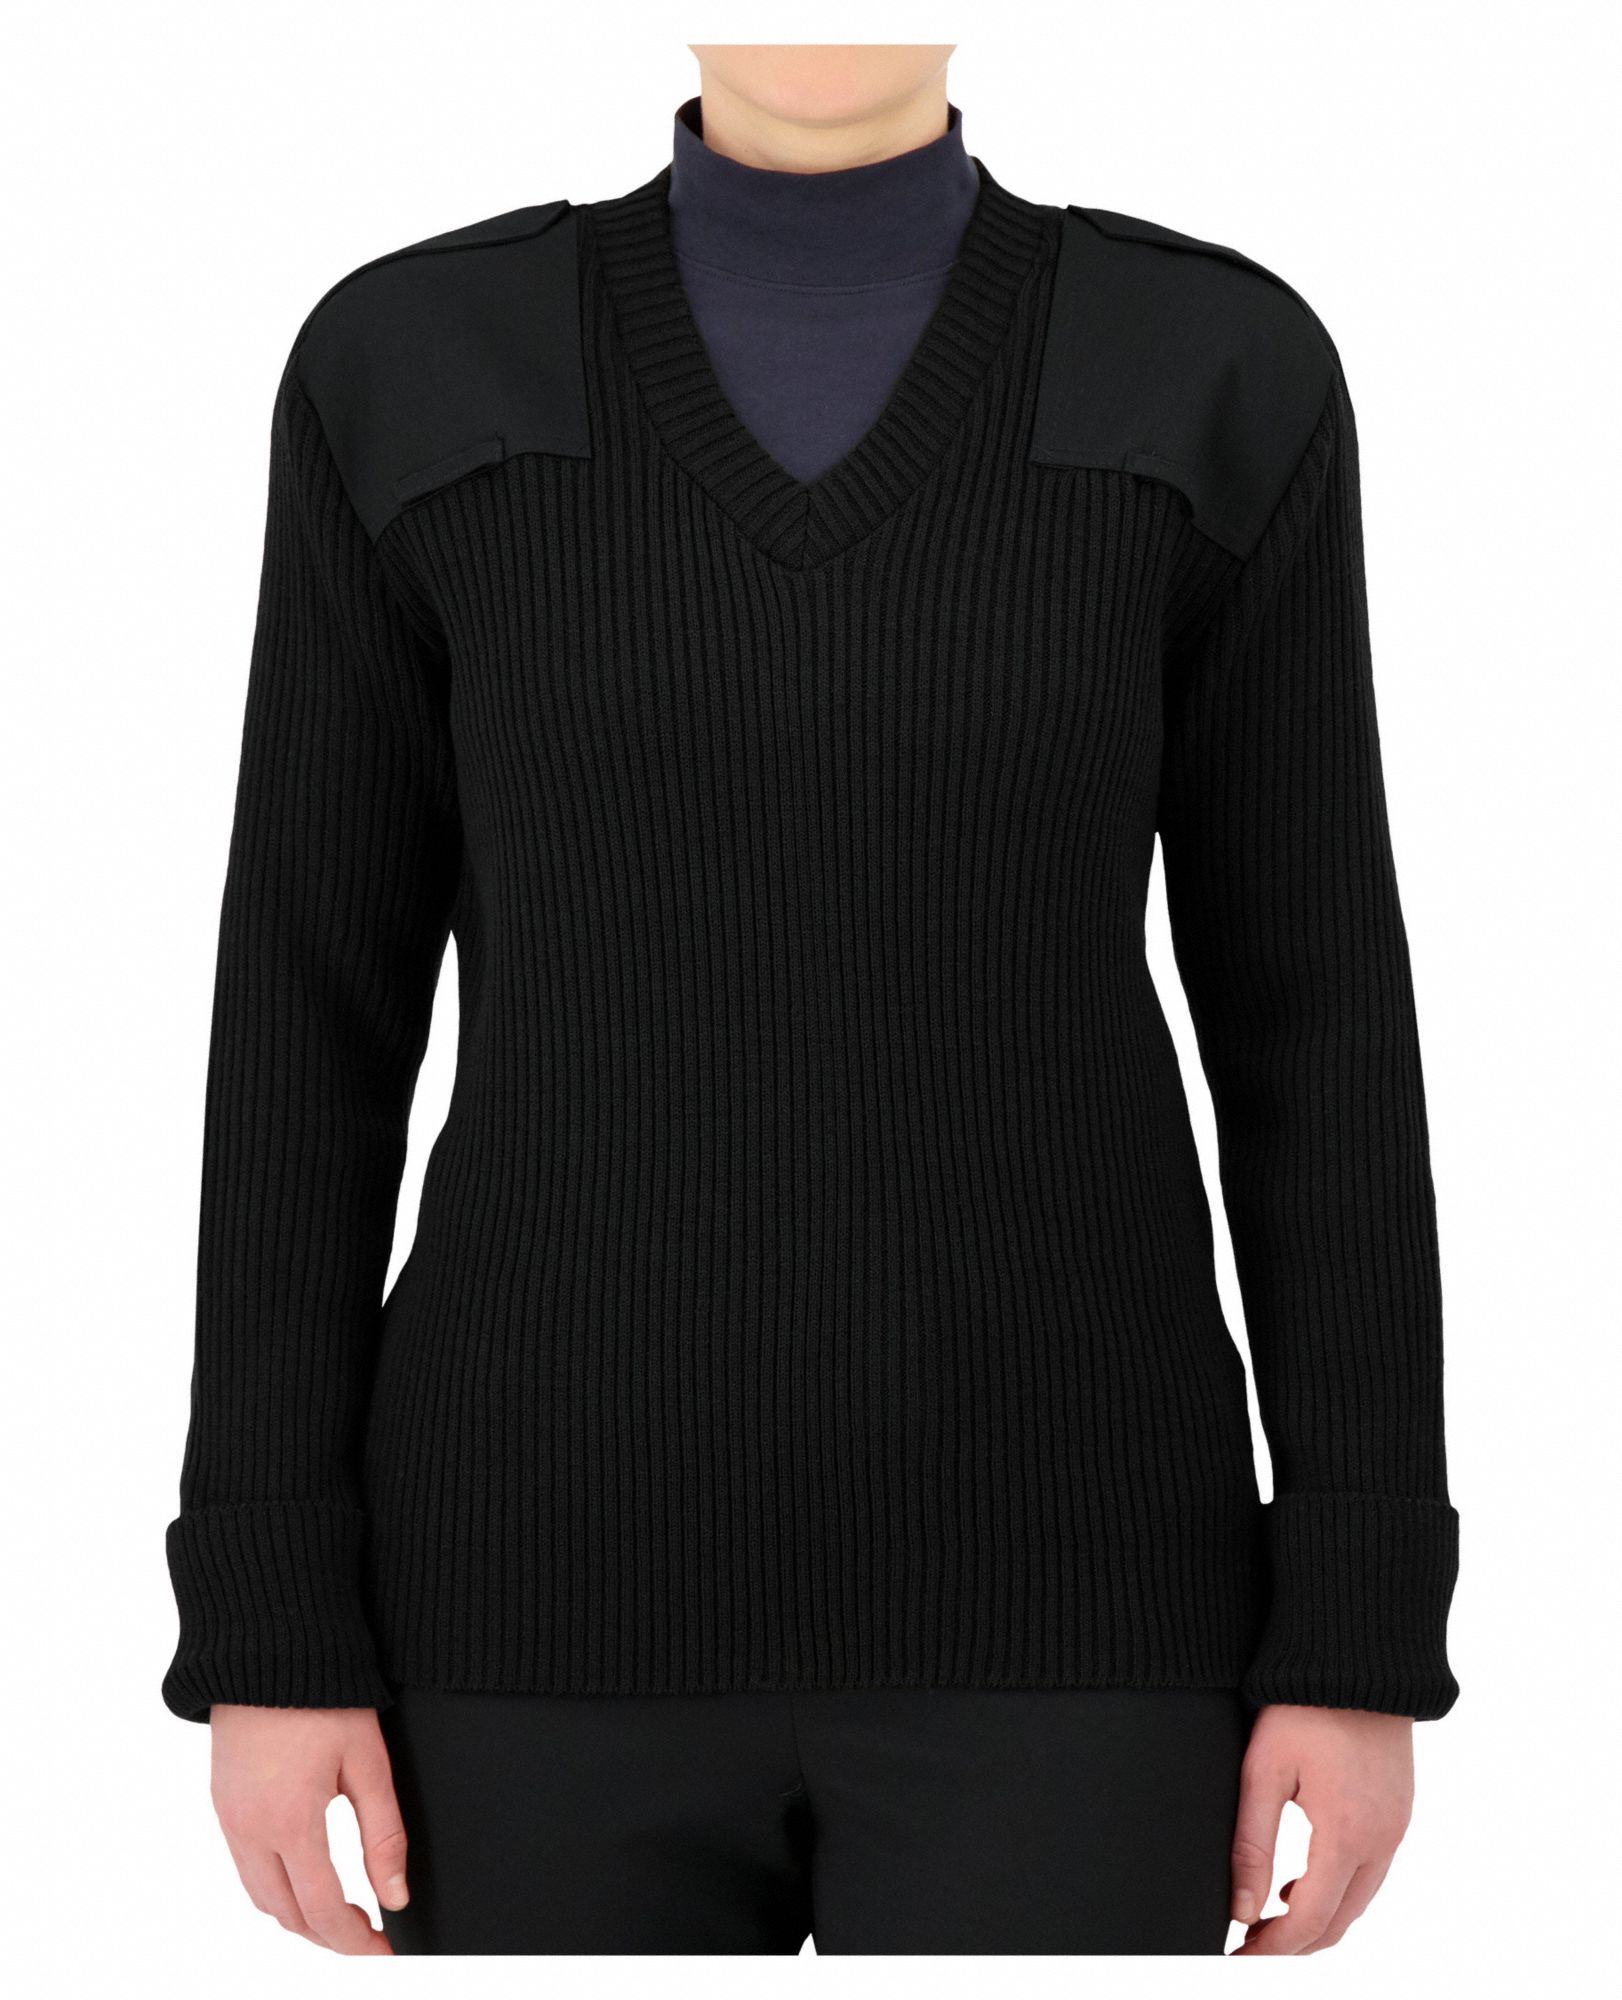 V-Neck Military Sweater: S, 40 in Fits Chest Size, Black, 100% Acrylic Material